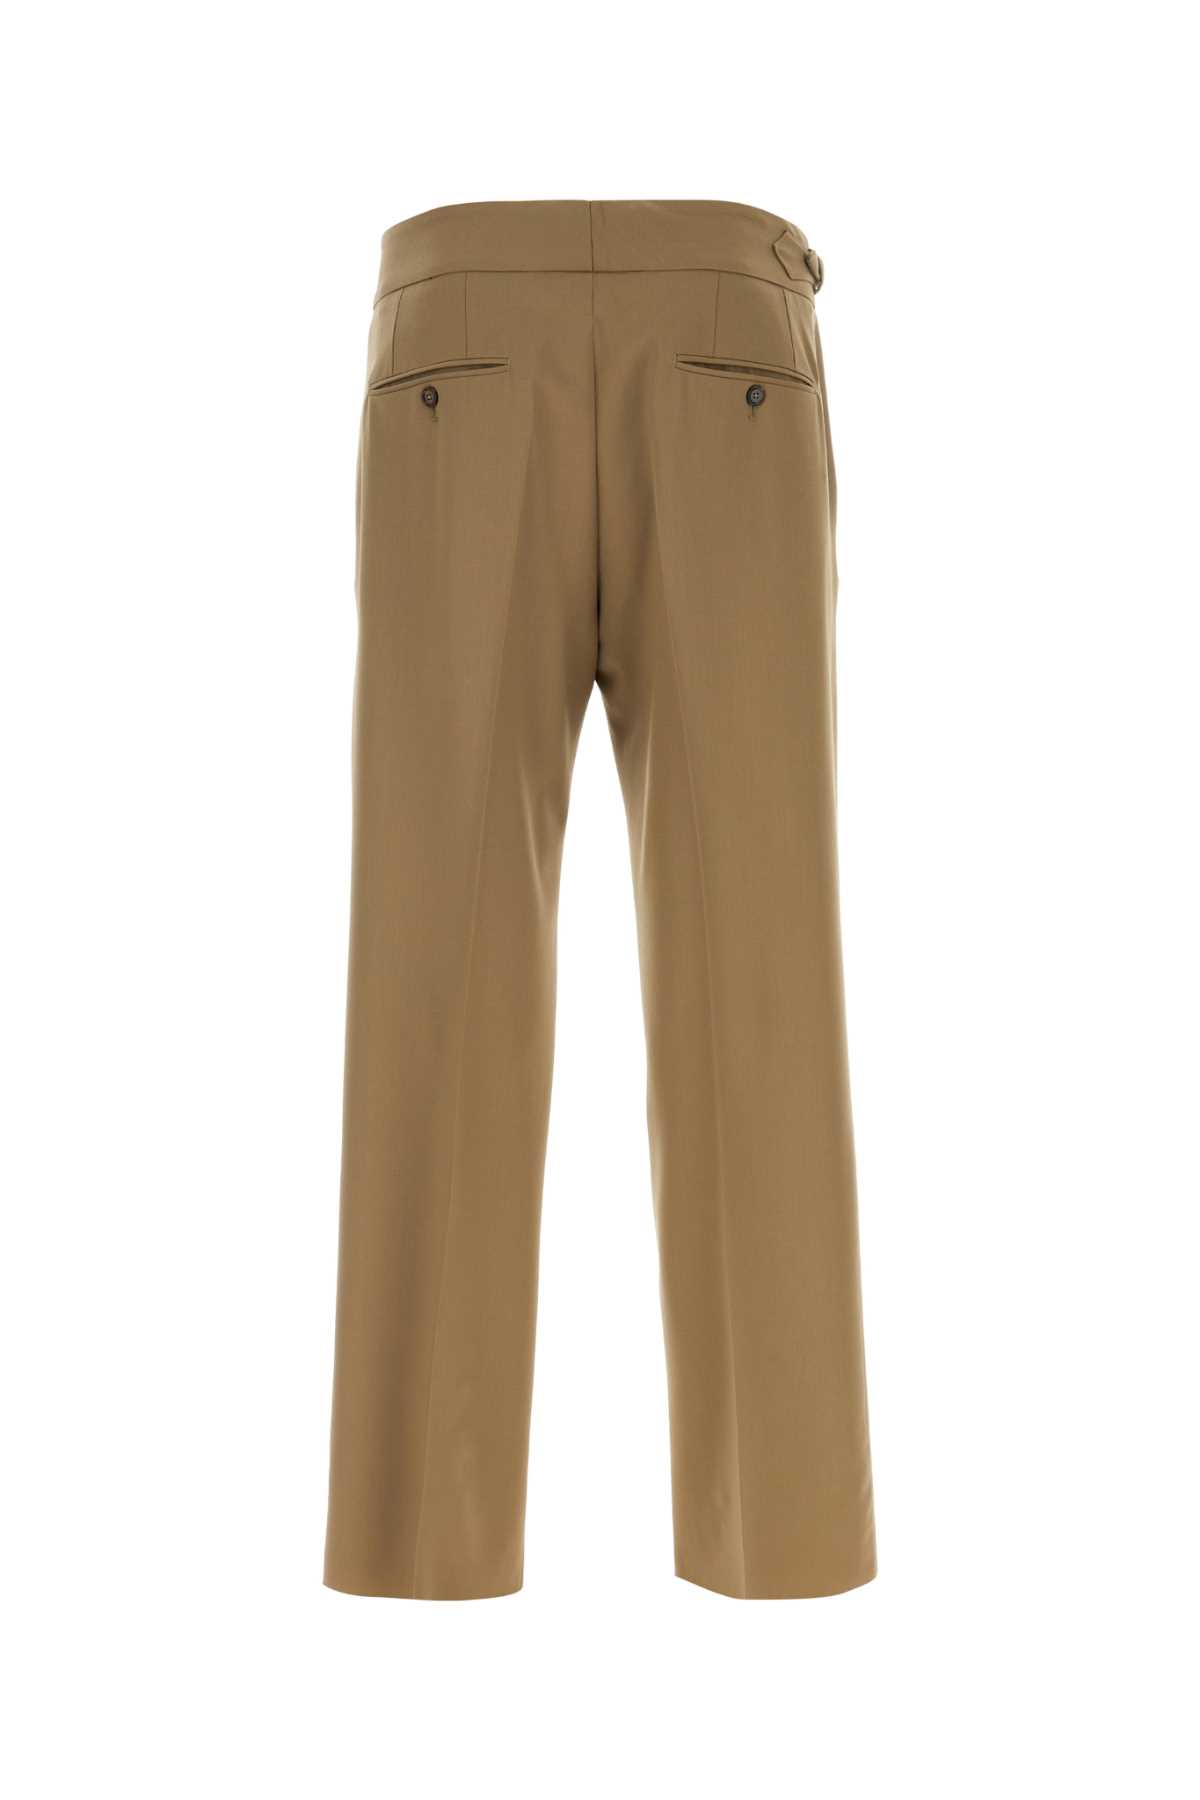 Shop Dolce & Gabbana Cappuccino Stretch Wool Pant In Makeupscuro